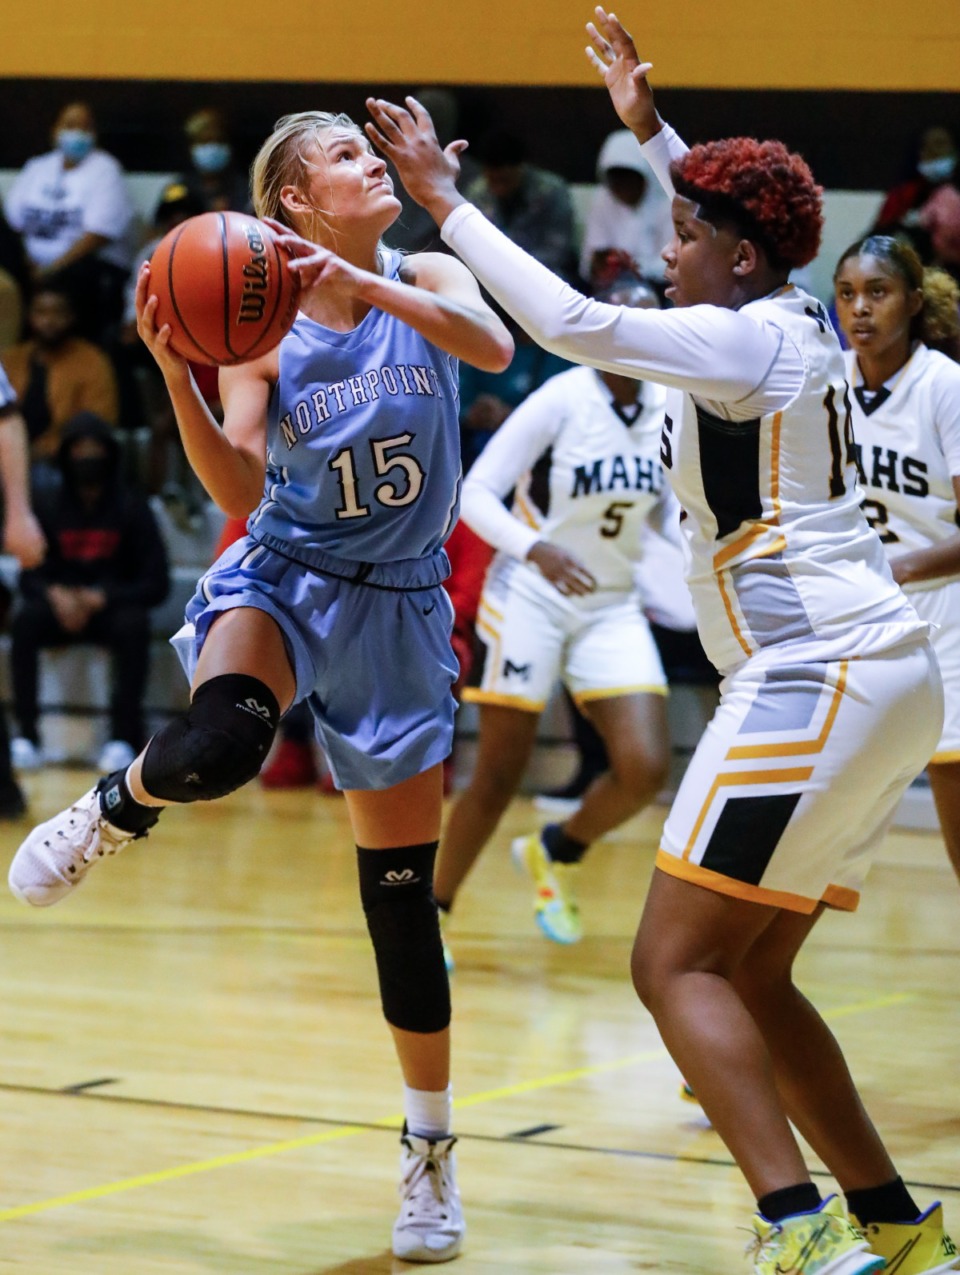 <strong>Northpoint forward Brylee Cherry (left) drives the lane against MAHS defender Keveonna Benson during action on Friday, Dec. 3.</strong> (Mark Weber/Daily Memphian)